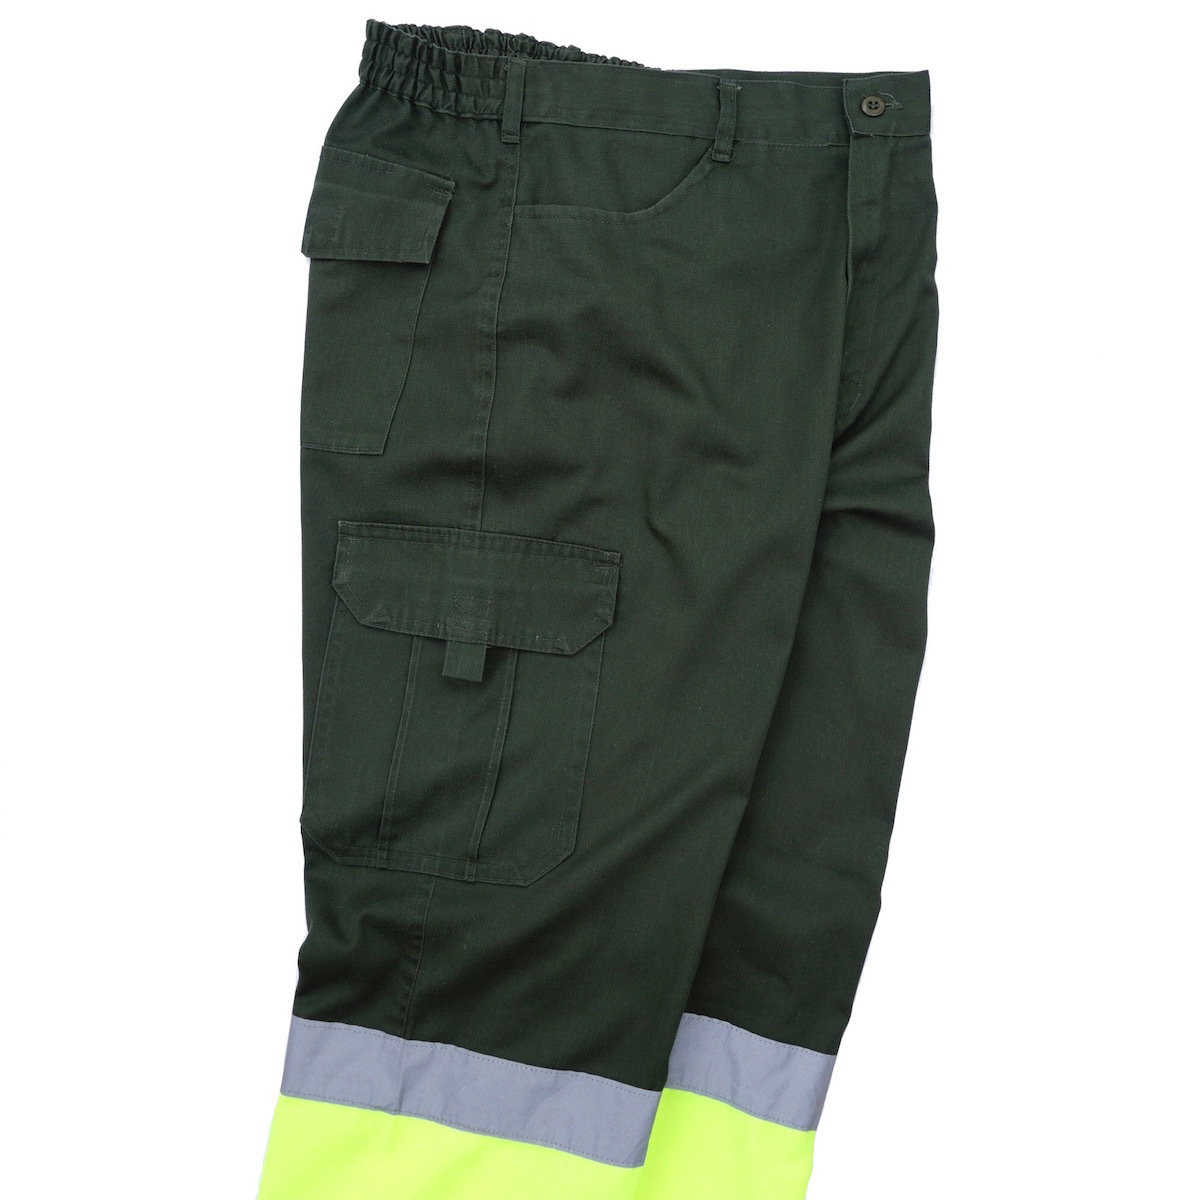 adeepi reflector Work cargo pants dark green × neon yellow 42 absolute size S~M degree Europe old clothes 